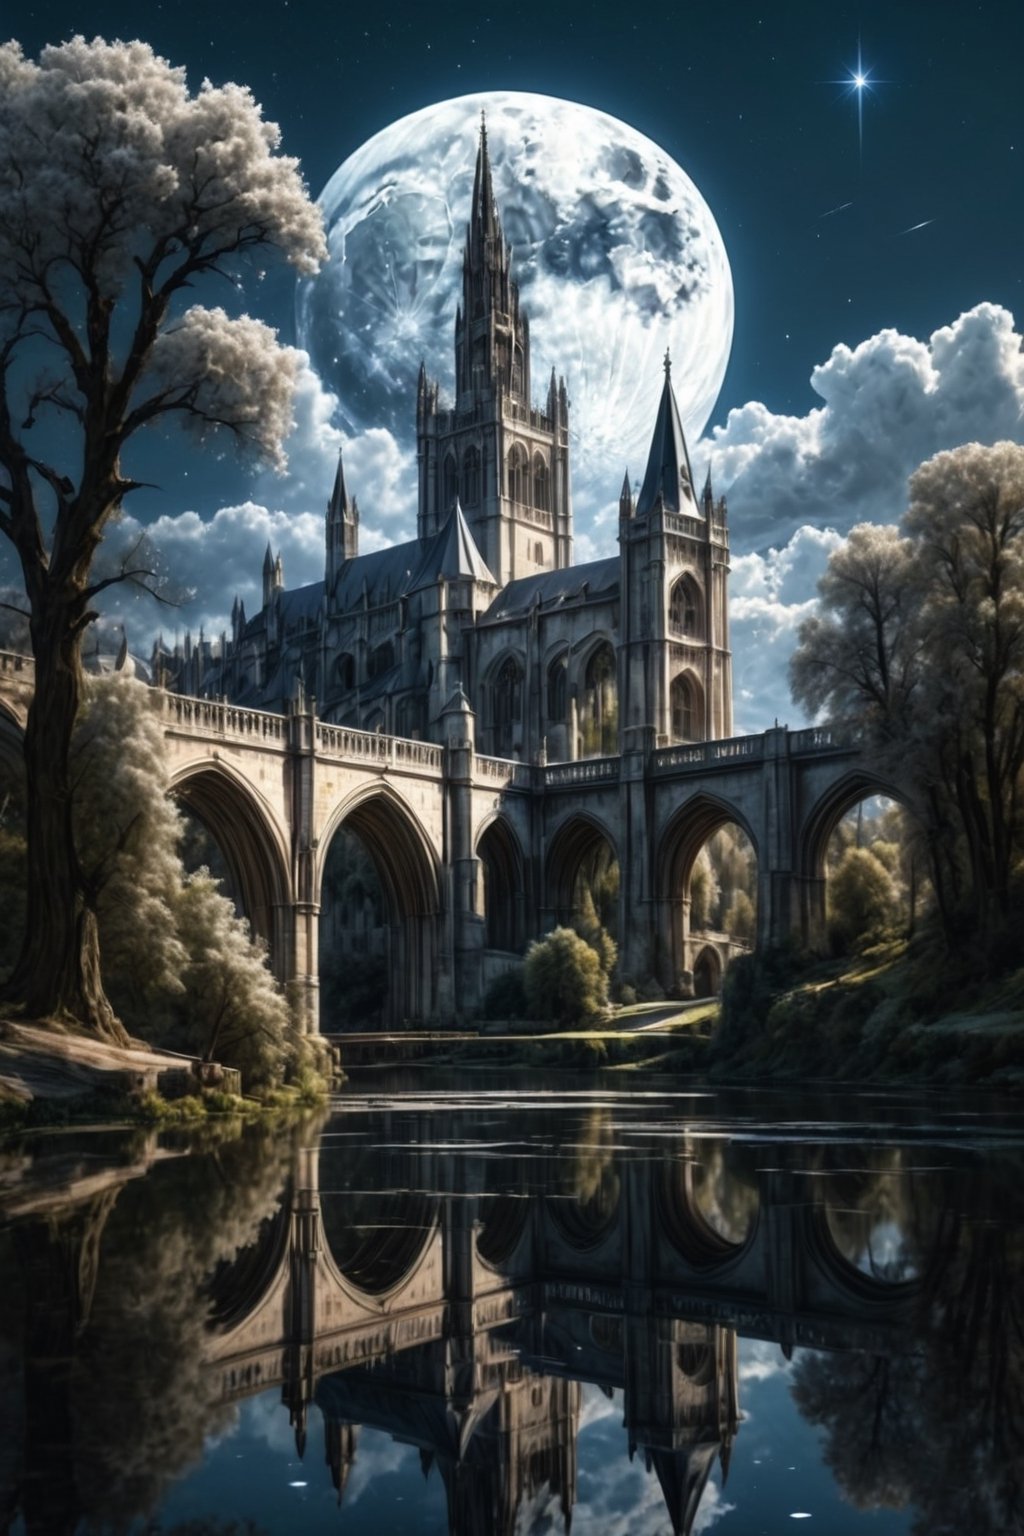 //quality, (masterpiece:1.4), (detailed), ((,best quality,)),//outdoors, sky, day, cloud, water, tree, no humans, scenery, bridge, river, gothic castle, cathedral, tower, landscape, lake, night, full moon, shooting stars, white trees